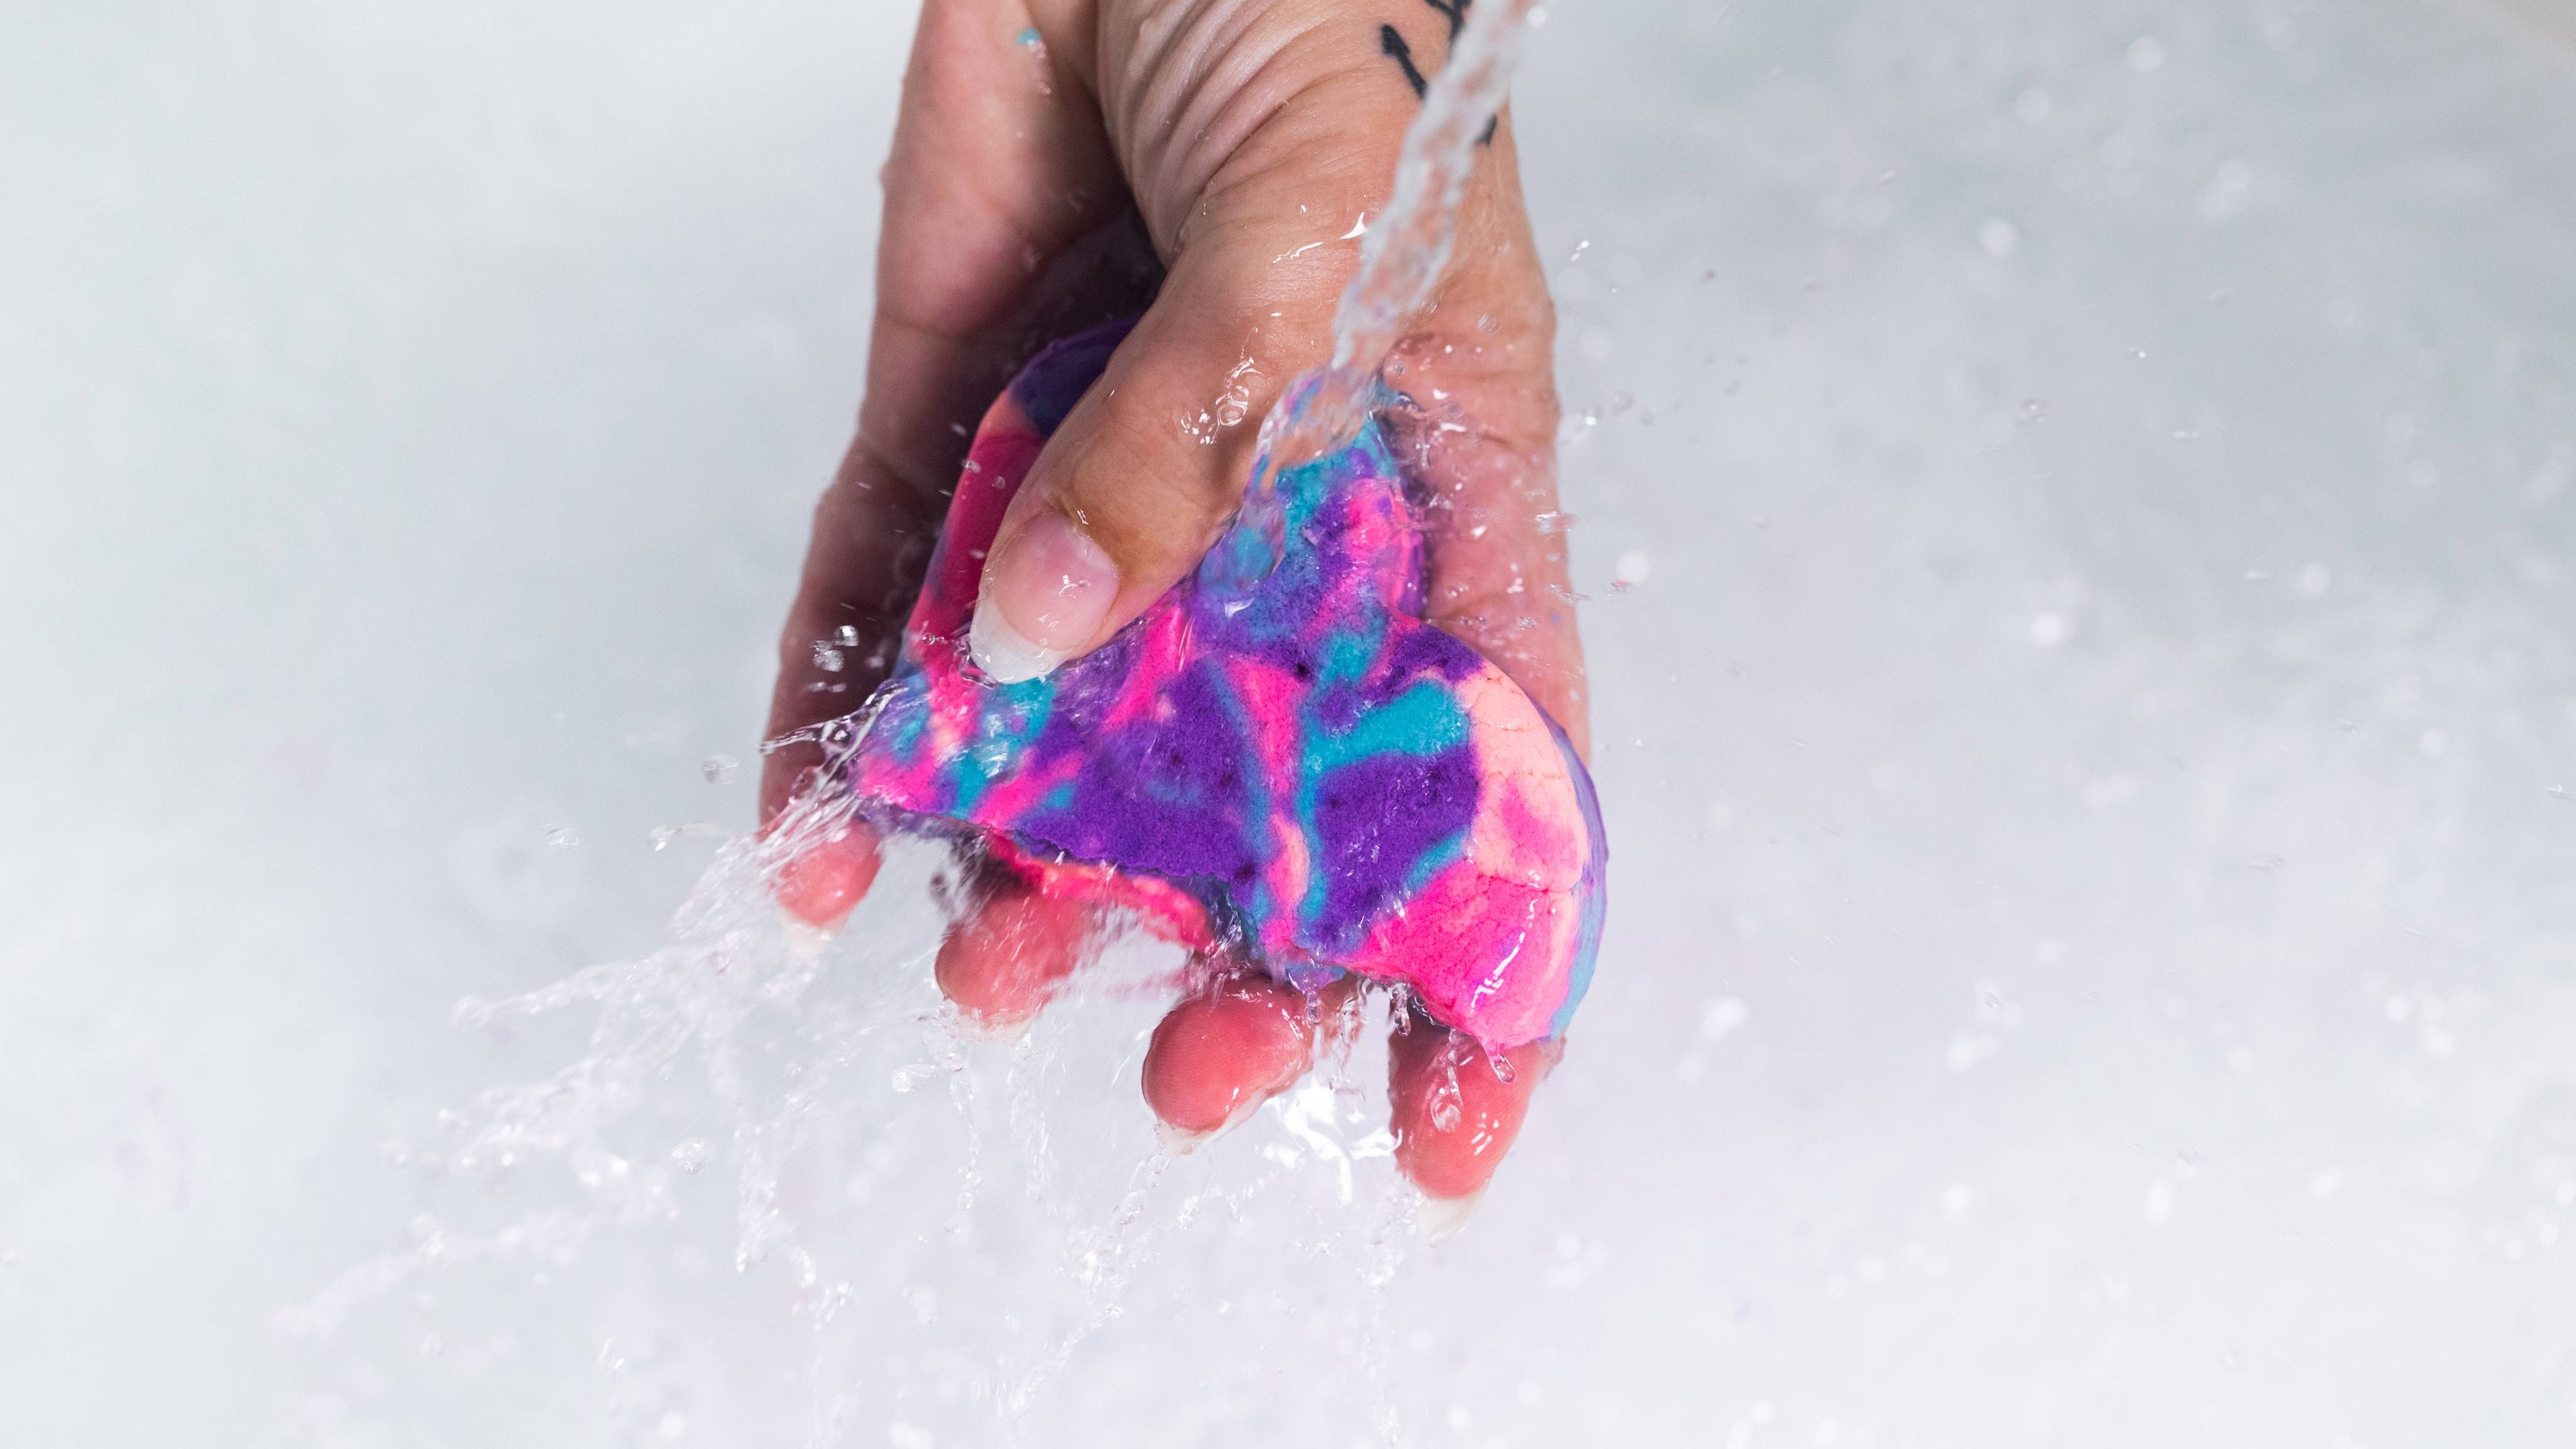 Model's hand holds half a Sleepy bubble bar, with swirling pinks, purples and blues, under running water.